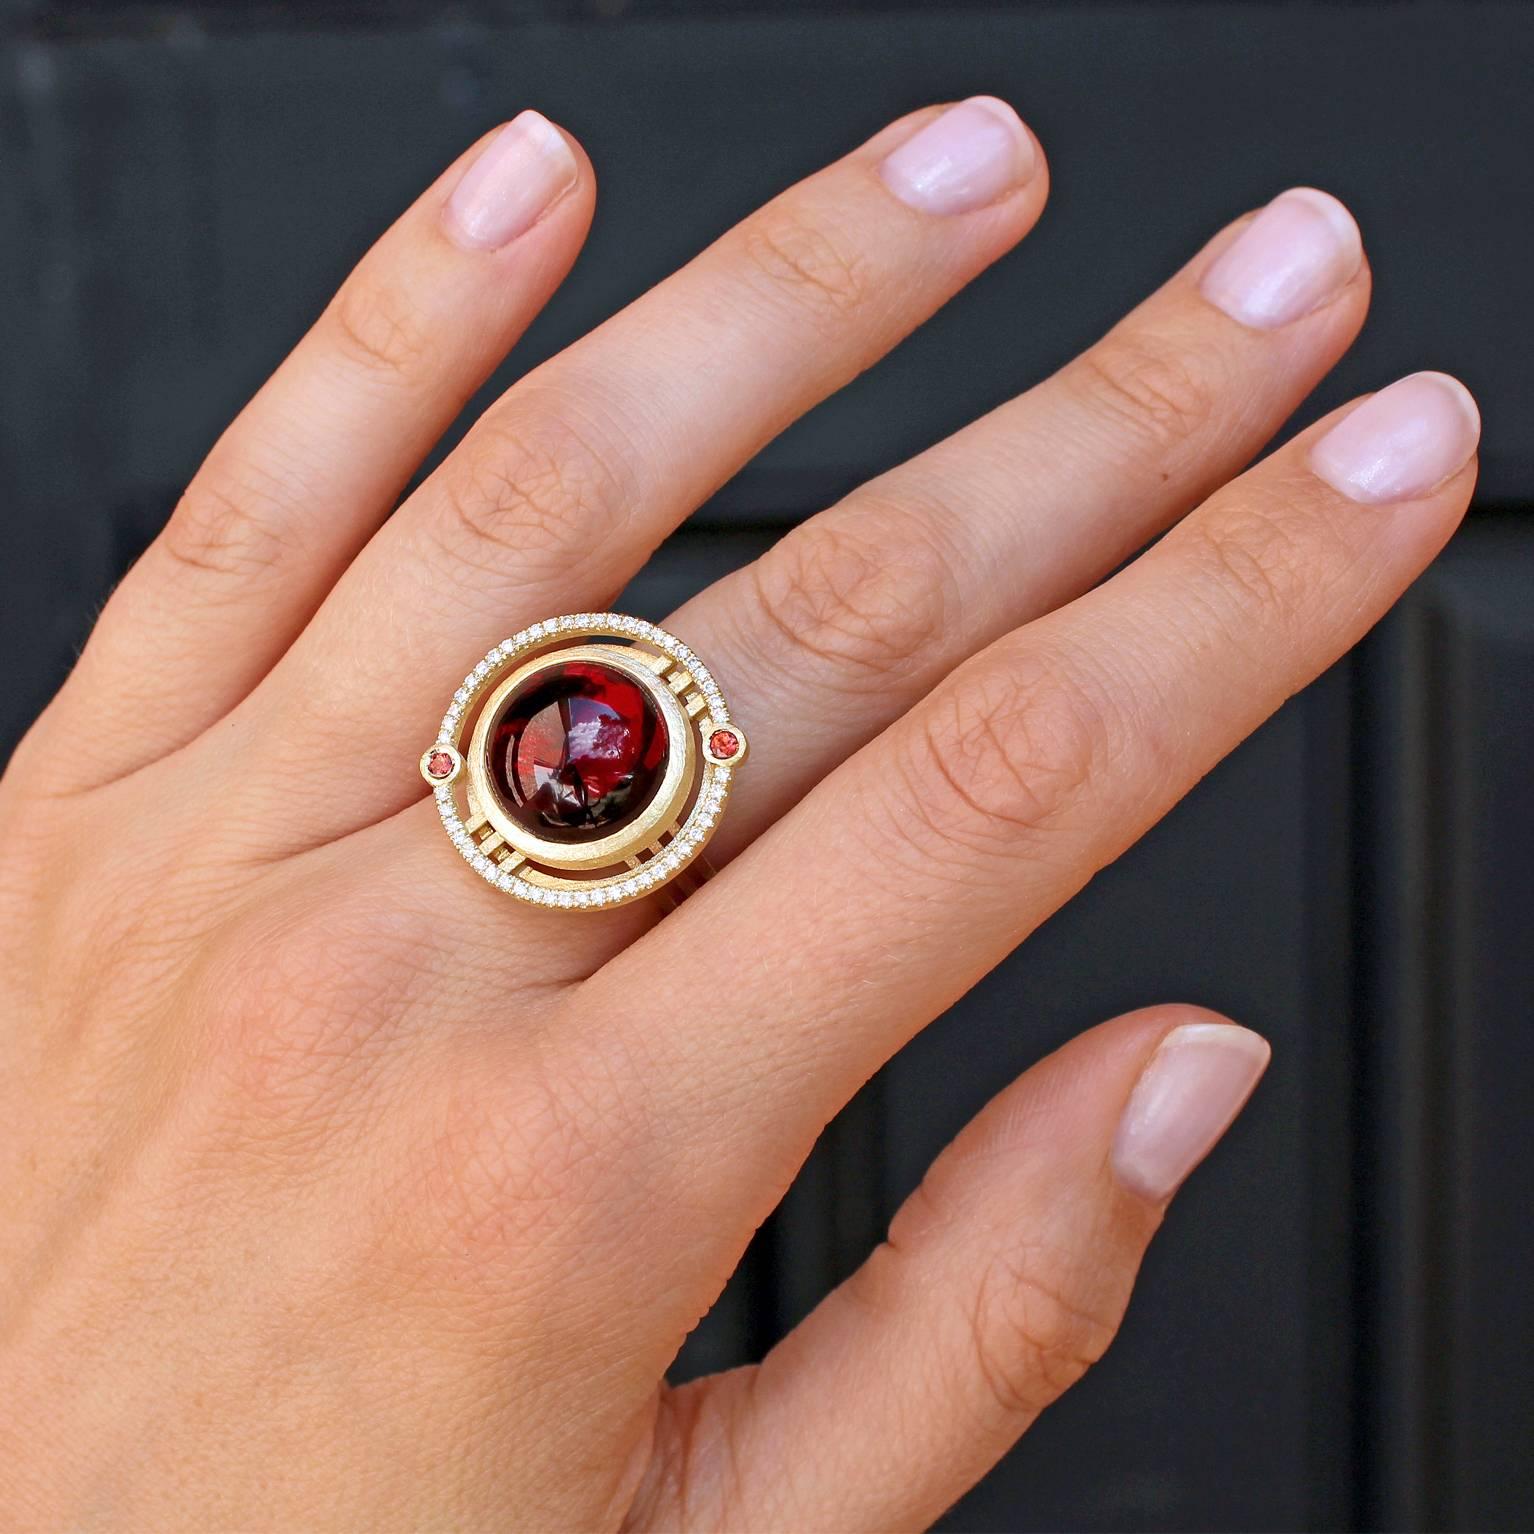 One of a Kind Nova Ring by London jewellery designers Shimell and Madden handcrafted in satin-finished 18k yellow gold featuring an extraordinary, glowing 14mm red garnet cabochon, and accented with 0.25 total carats of round brilliant-cut white